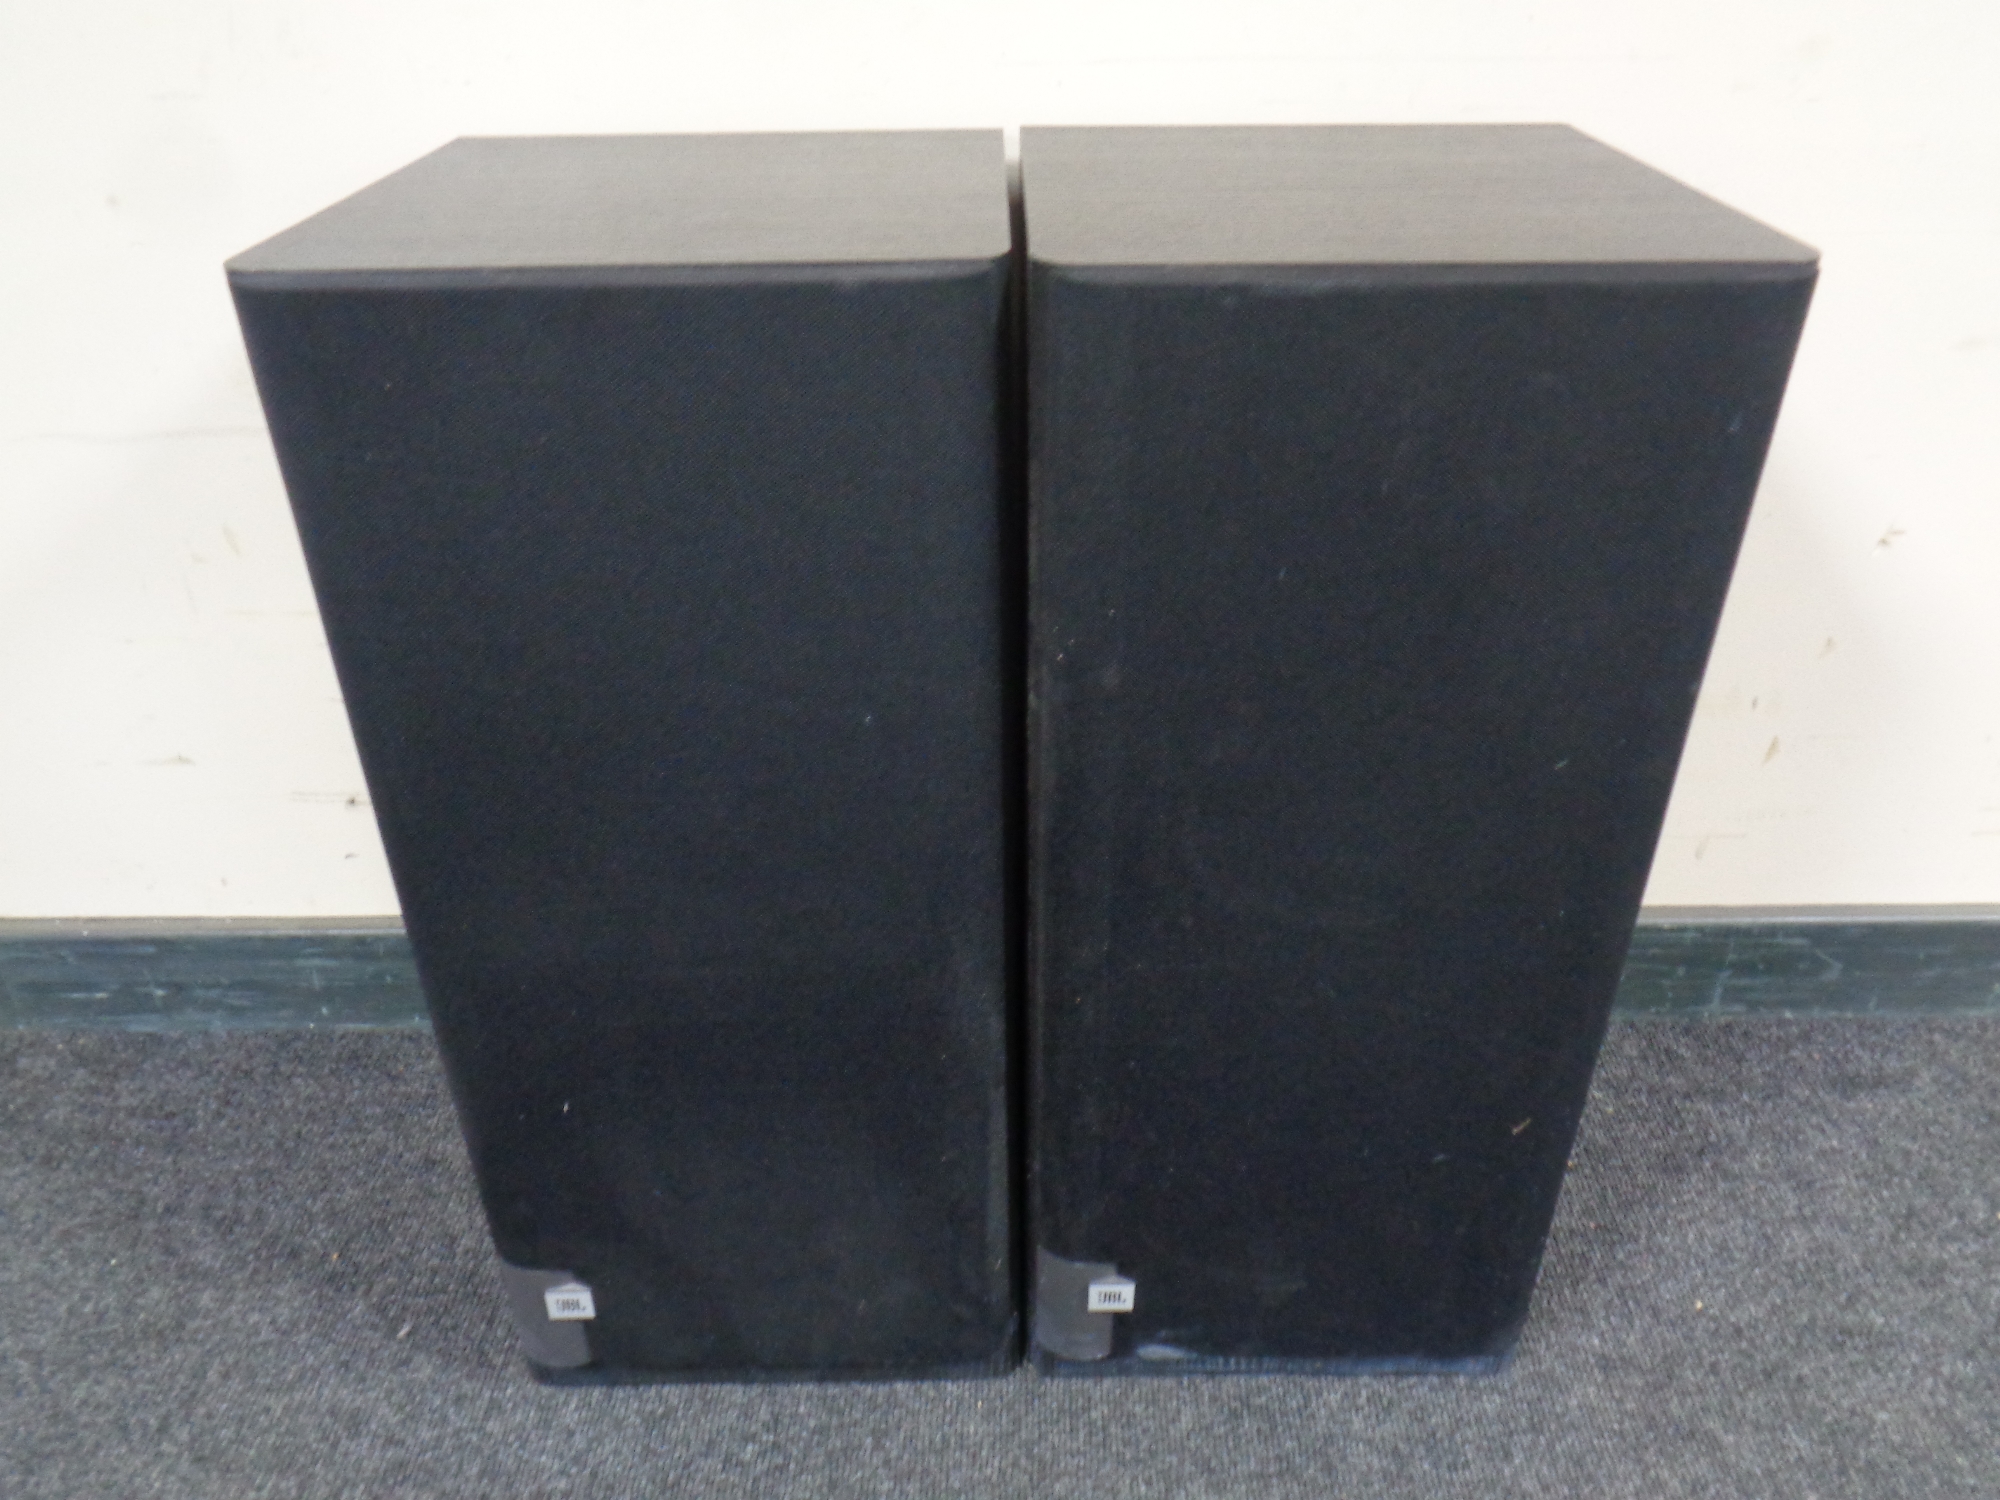 A pair of JBL LX500 speakers (continental wiring)